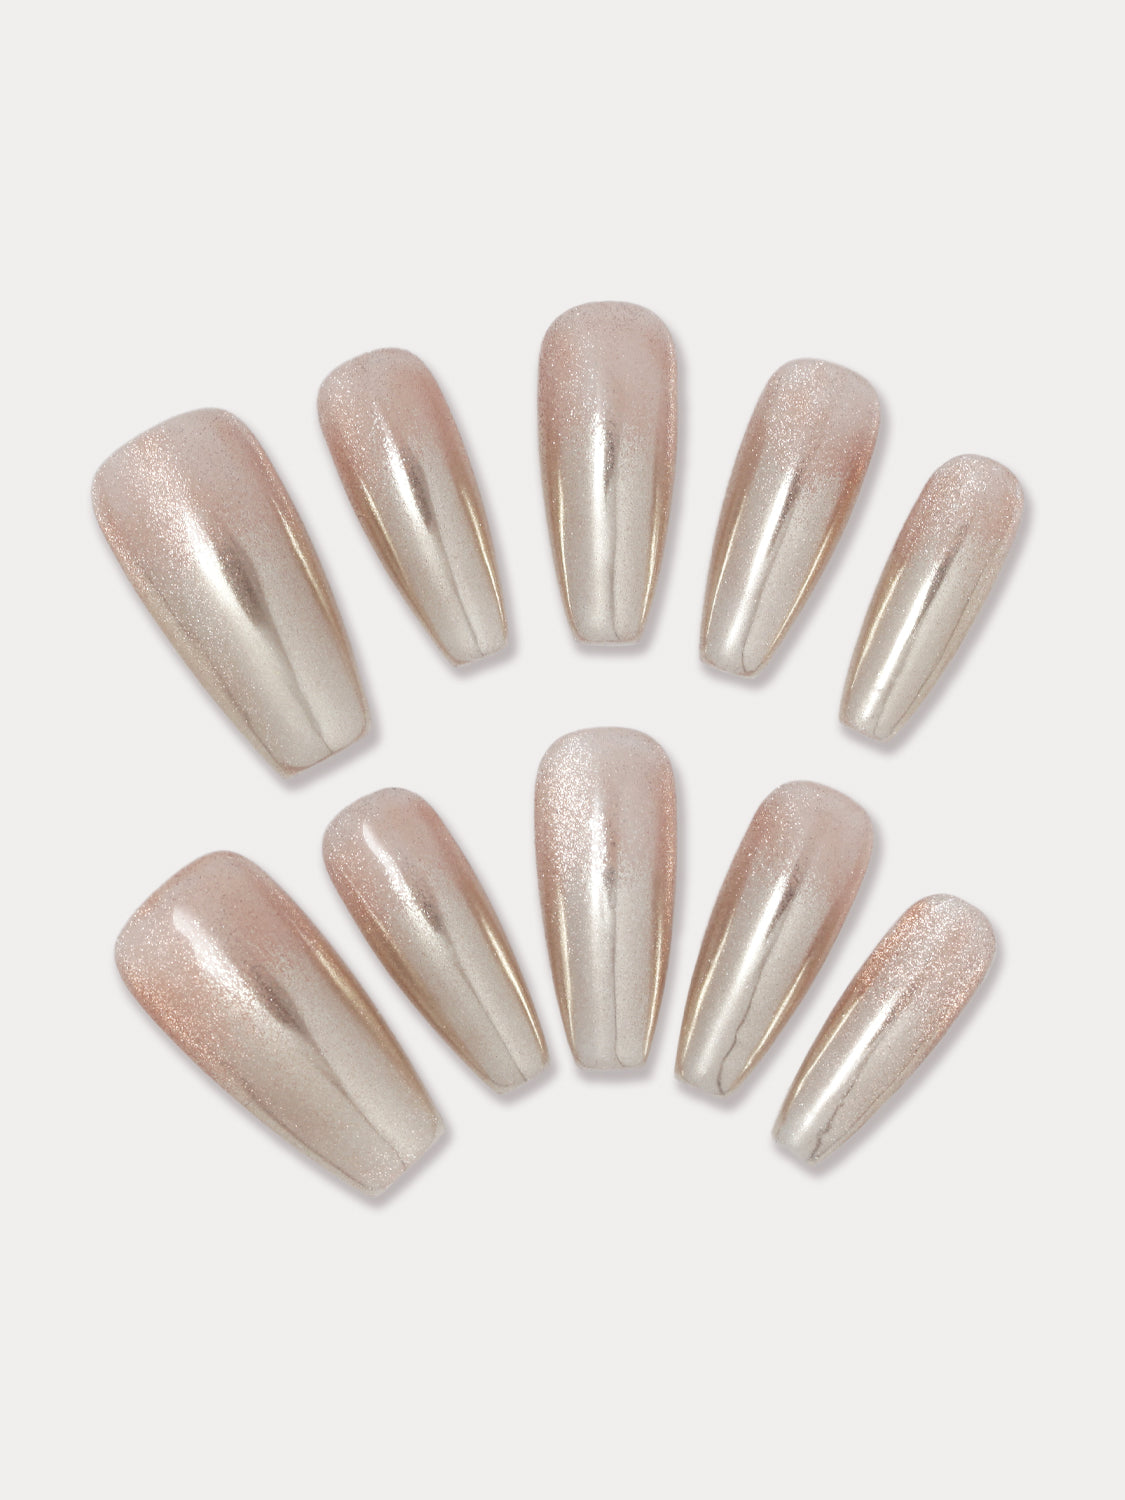 MIEAP glimmer nail set creates a gradient metallic mirror effect using silver chrome powder, with silver wide cat's eye gel applied at the nail roots. In low light, it twinkles subtly like stars, while in strong light, it reveals a dazzling diamond-like brilliance. #MIEAPnails #pressonnail #acrylicnail #nails #nailart #naildesign #nailinspo #handmadenail #summernail #nail2023 #graduationnail #chromenail  #datingnail #promnail